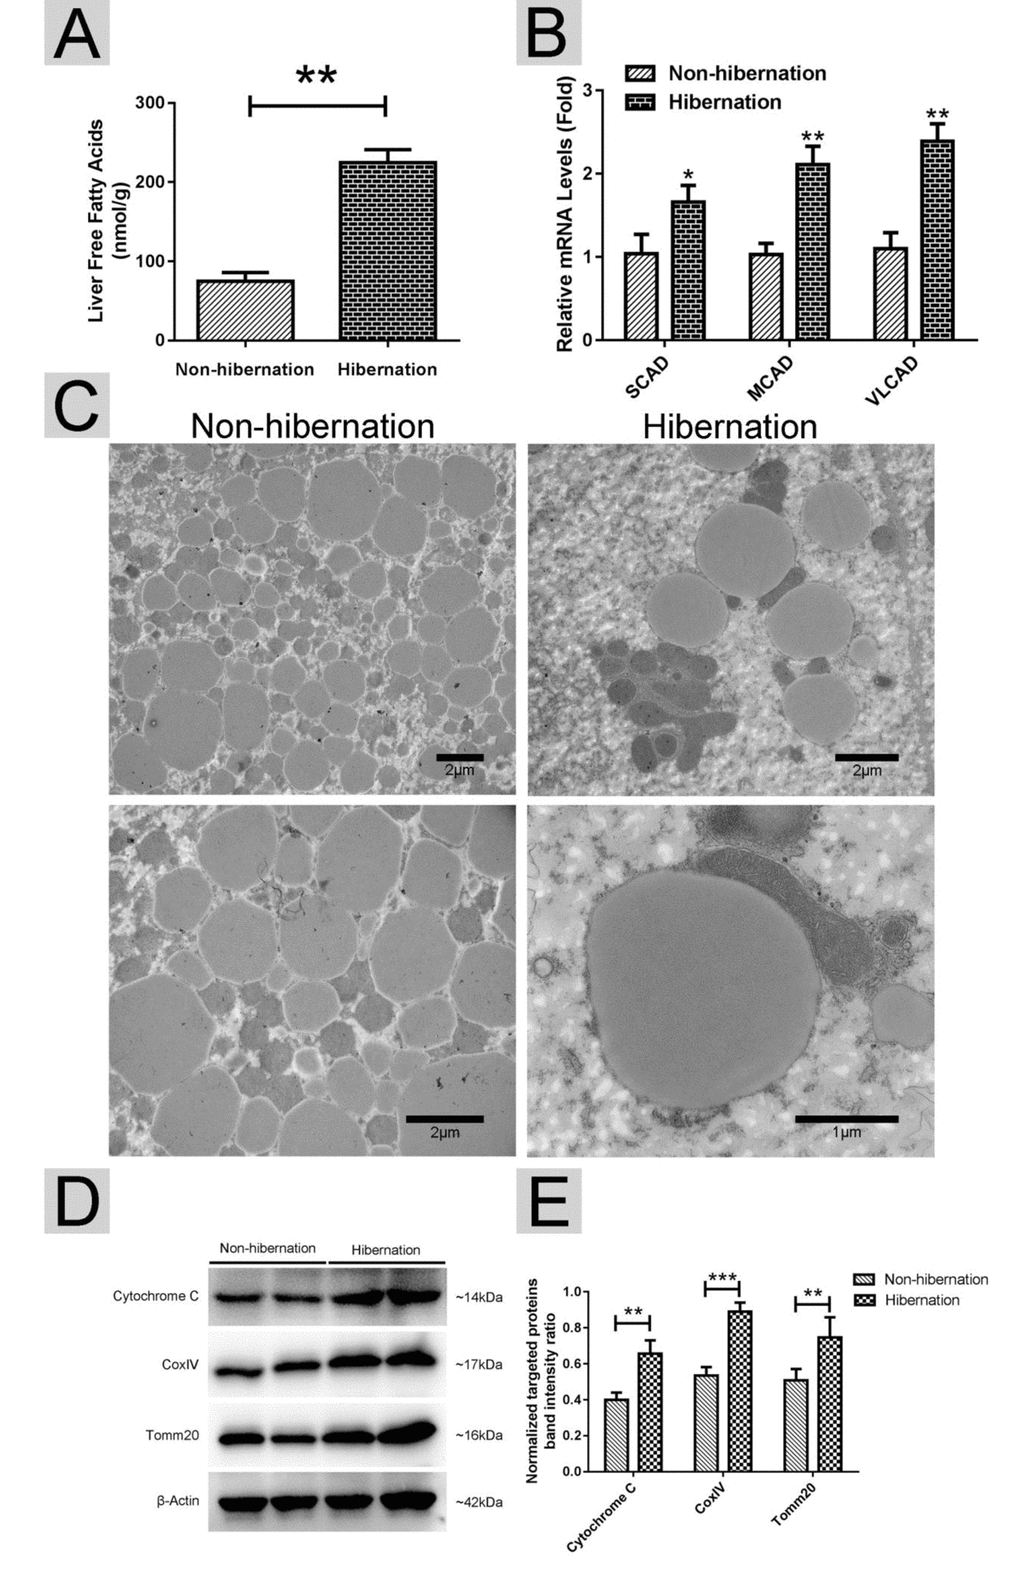 Lipolysis was stimulated during hibernation. (A) Contents of non-esterified free fatty acids (NEFAs) in the liver; (B) The mRNA expression of regulatory enzymes for mitochondrial β-oxidation (SCAD, MCAD and VLCAD); (C) Transmission electron microscopy (TEM) image of hepatocytes; (D) Western blotting analysis of mitochondrial markers (Cytochrome C, Cox IV and Tomm20); (E) Statistics of the western blotting results.